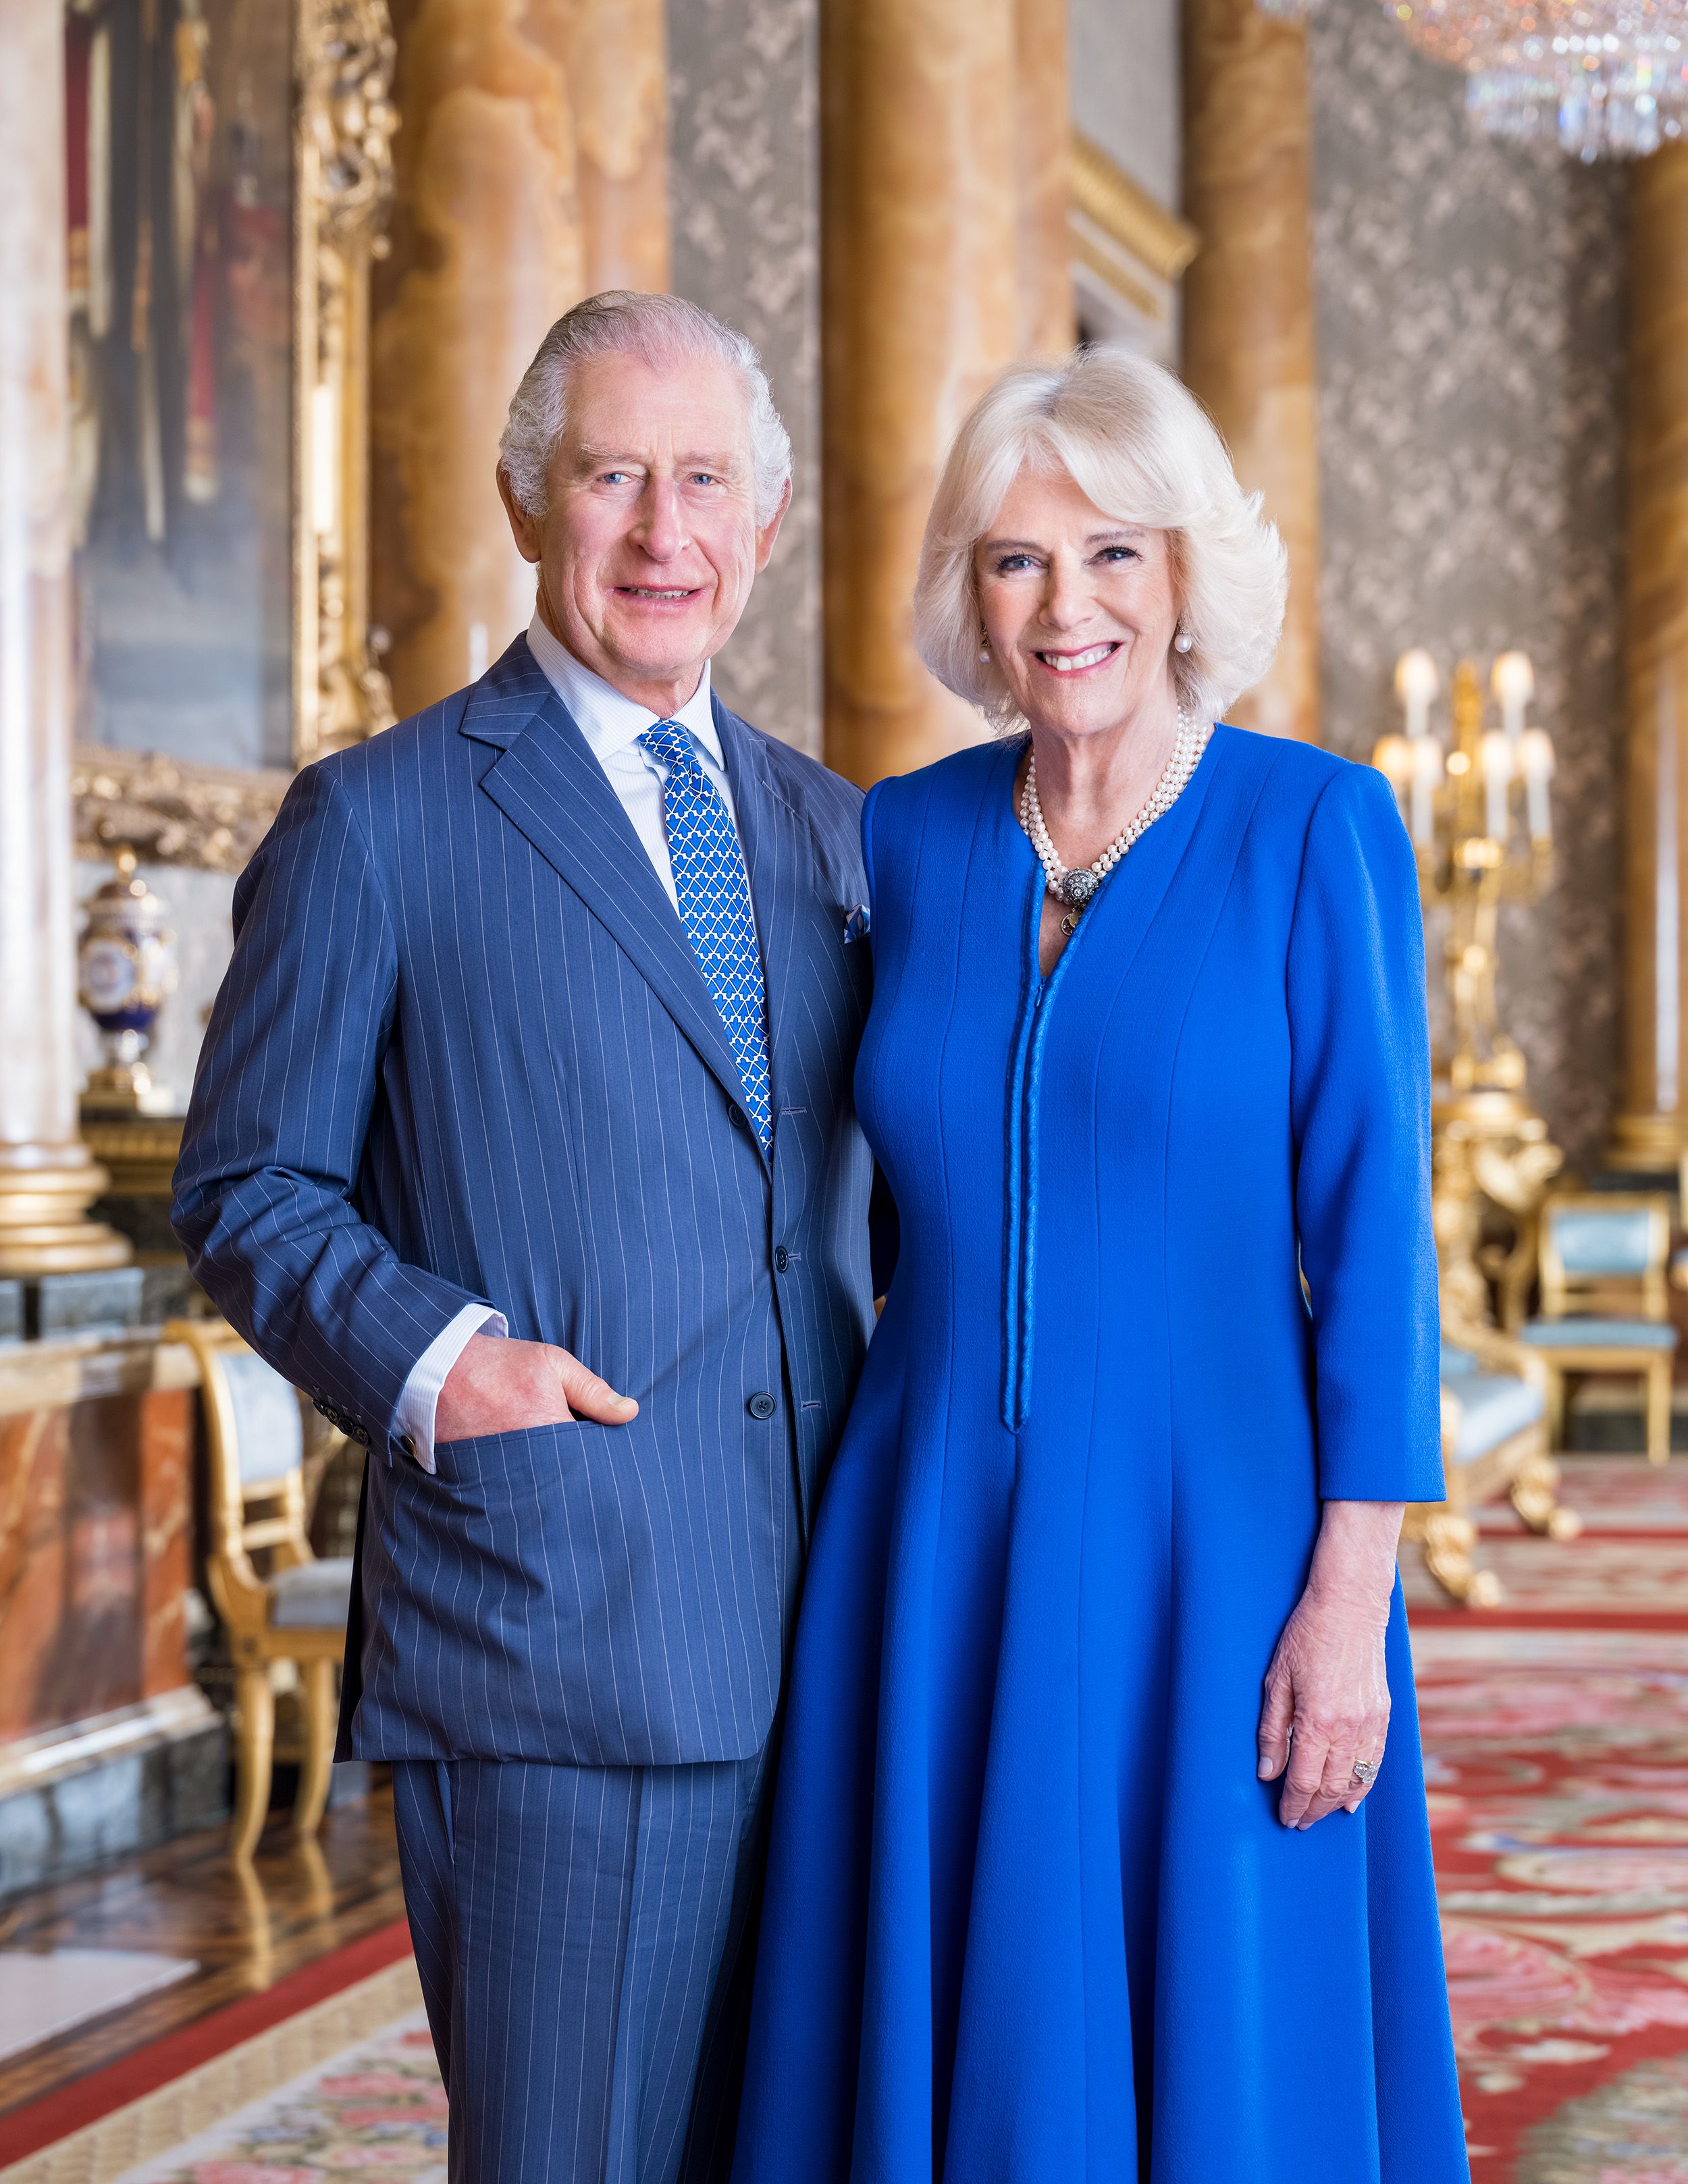 <p>On April 4, 2023, Buckingham Palace released this new portrait of Britain's King Charles III and Queen Consort Camilla in the Blue Drawing Room at Buckingham Palace in London. The portrait, which was taken in March 2023, was released to mark their coronation on May 6, 2023.</p>